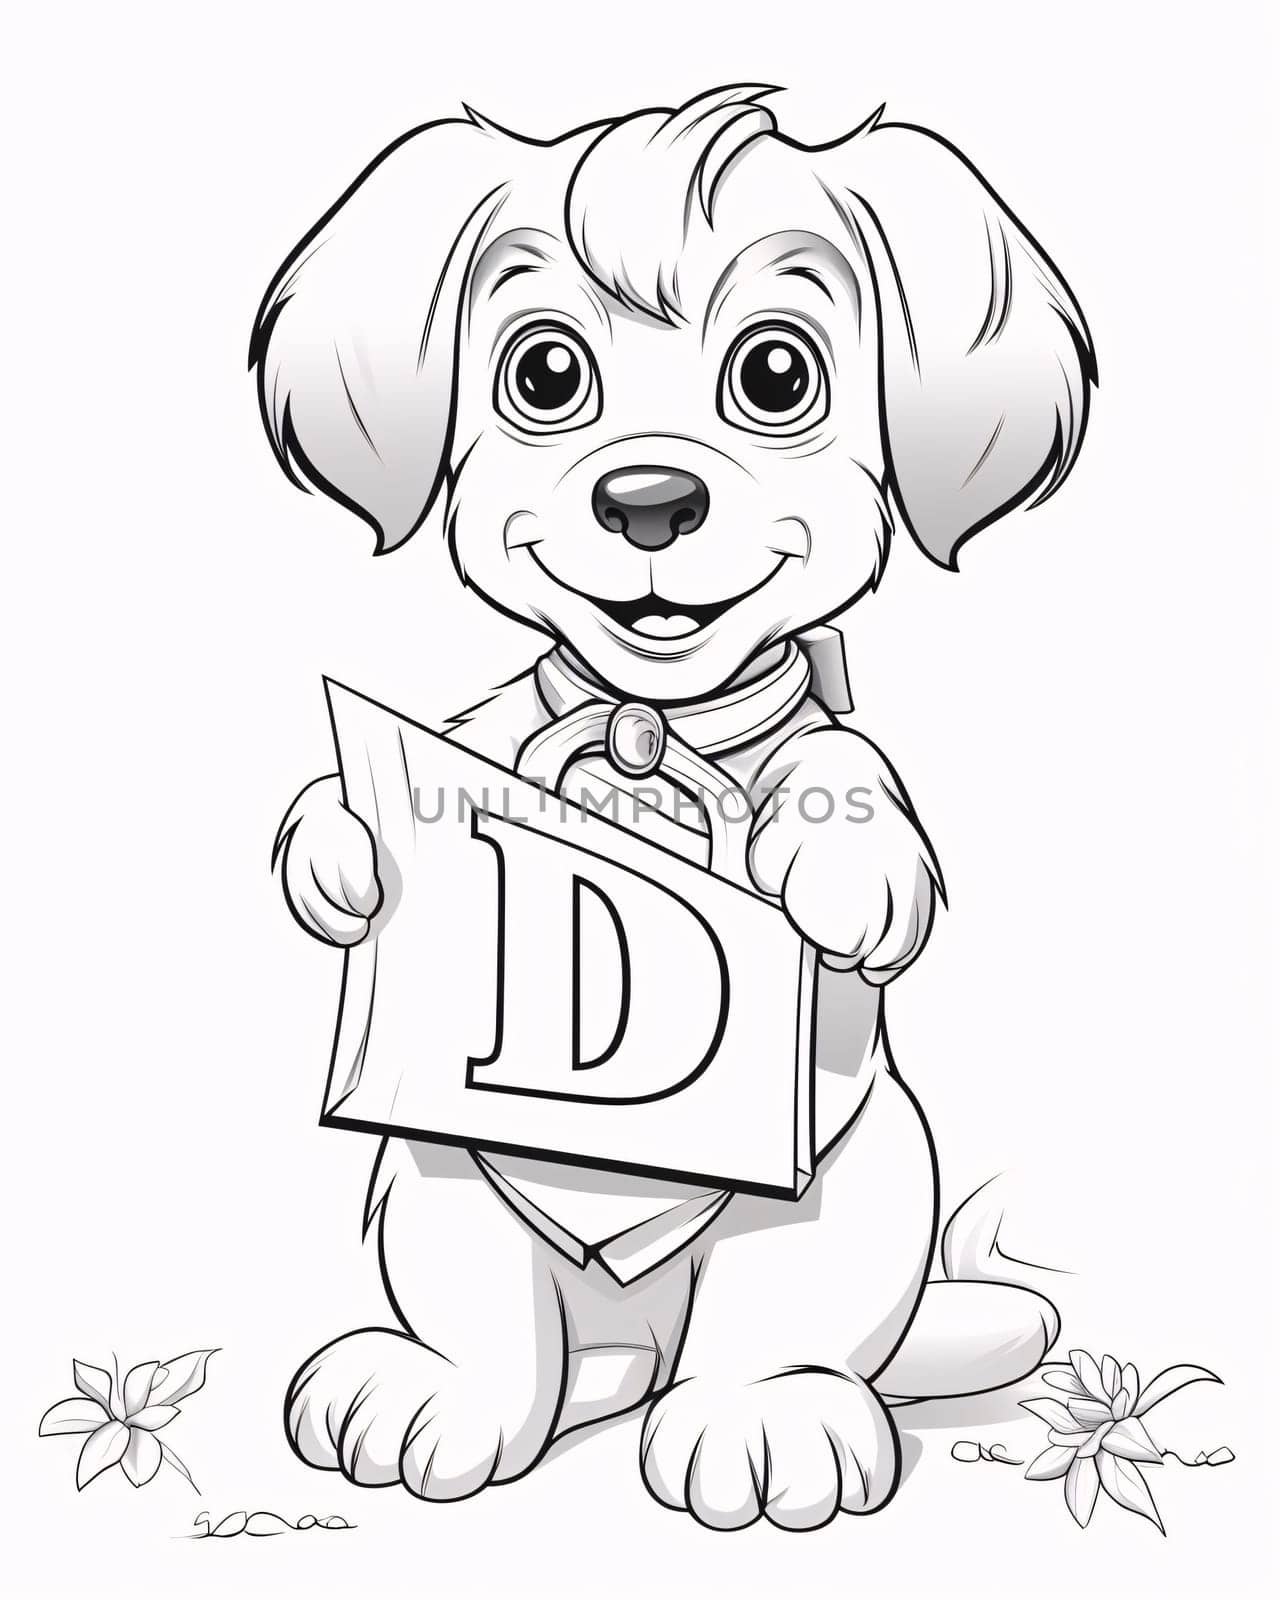 Graphic alphabet letters: Illustration of a Cute Puppy Holding a Letter D.